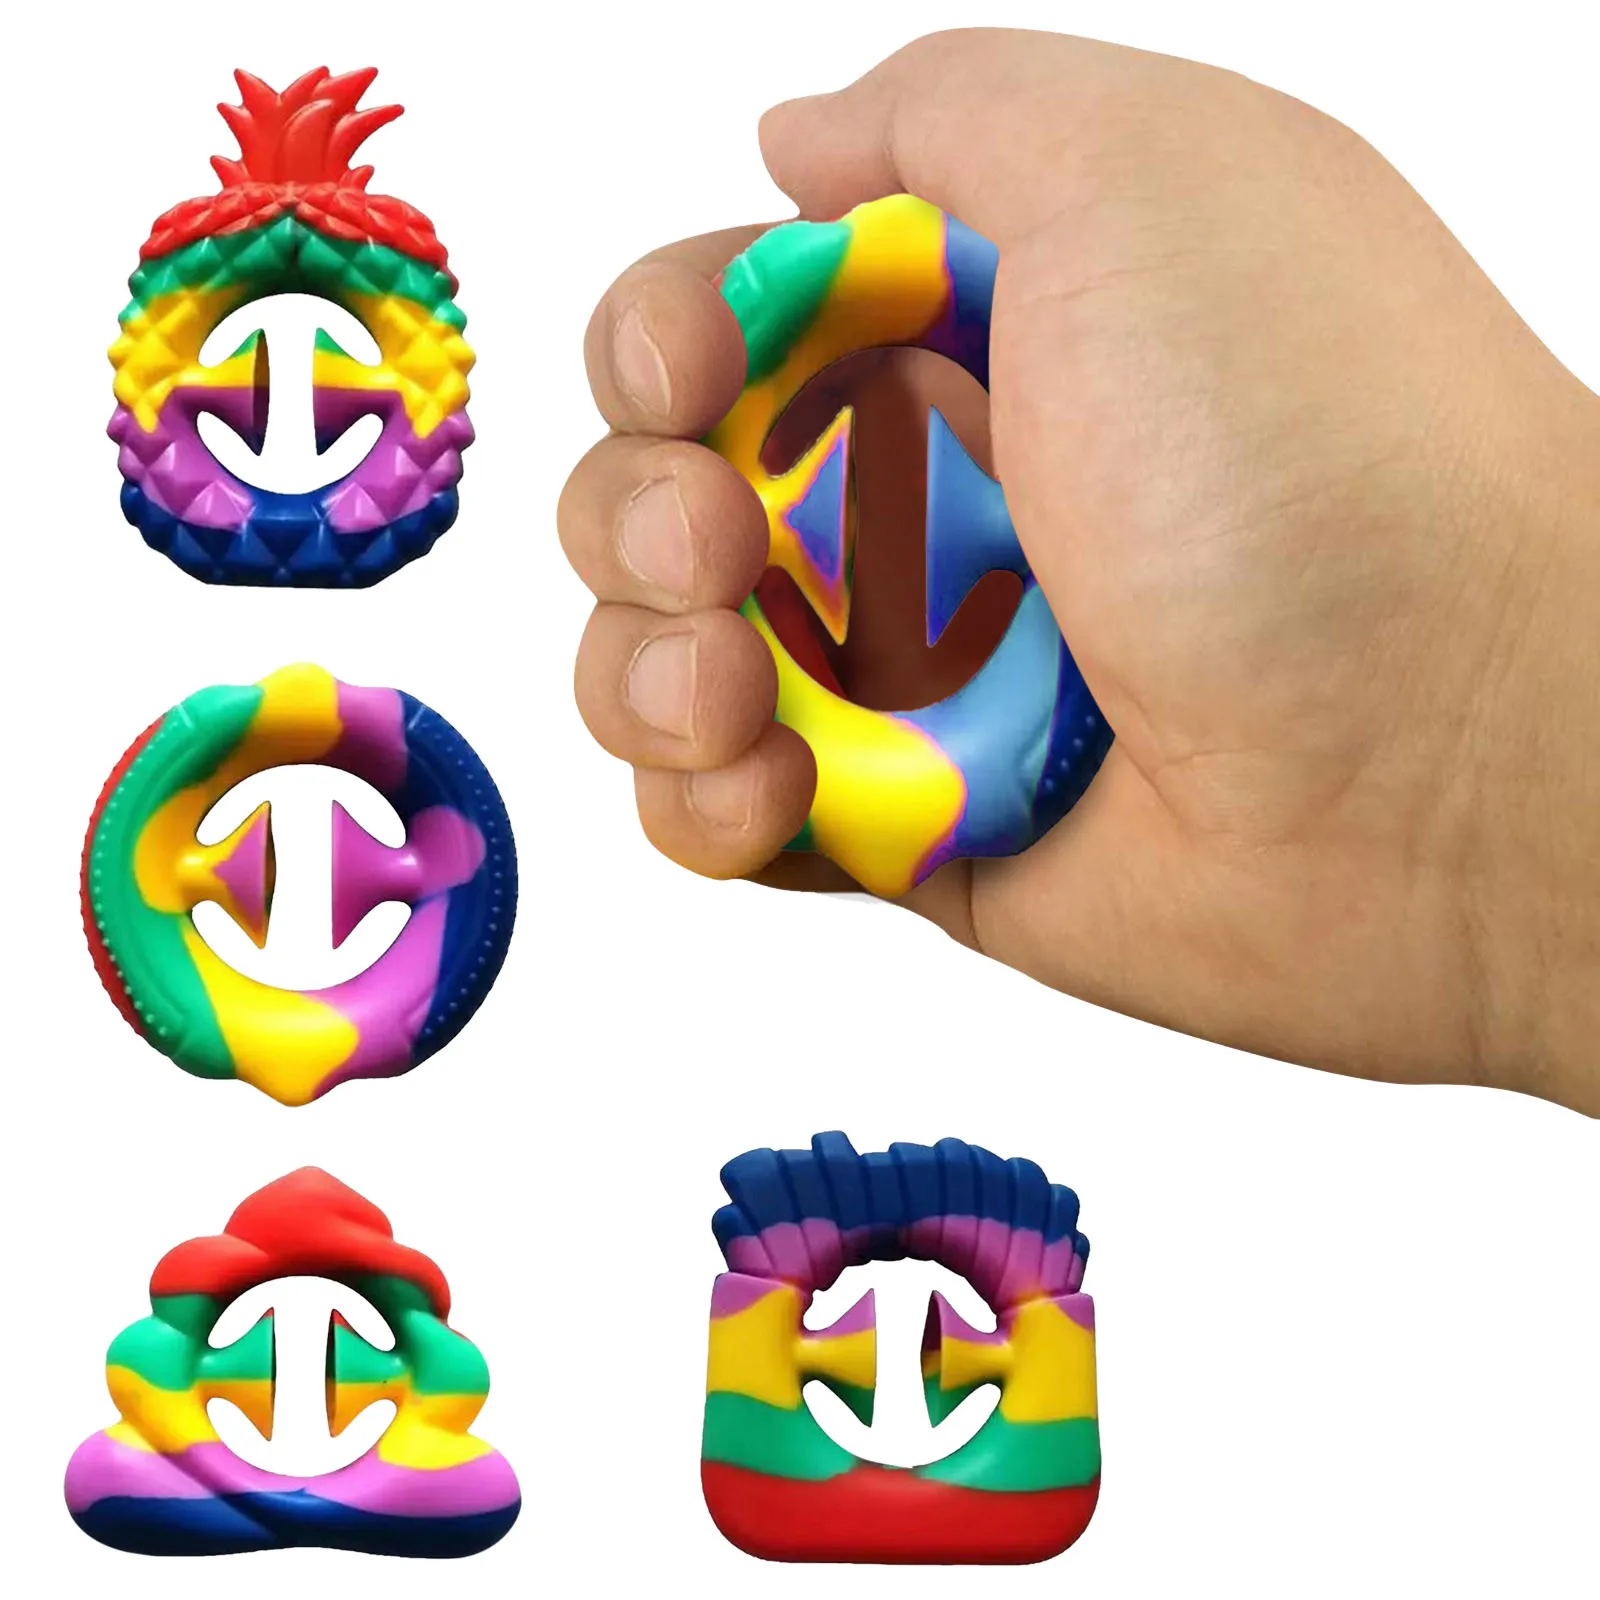 

Simple Snapperz Sensory Fidget Snap Hand Toy Relief Stress Relieve Anti-anxiety Silicone Toy Fidget Sensory Toy Brinquedos